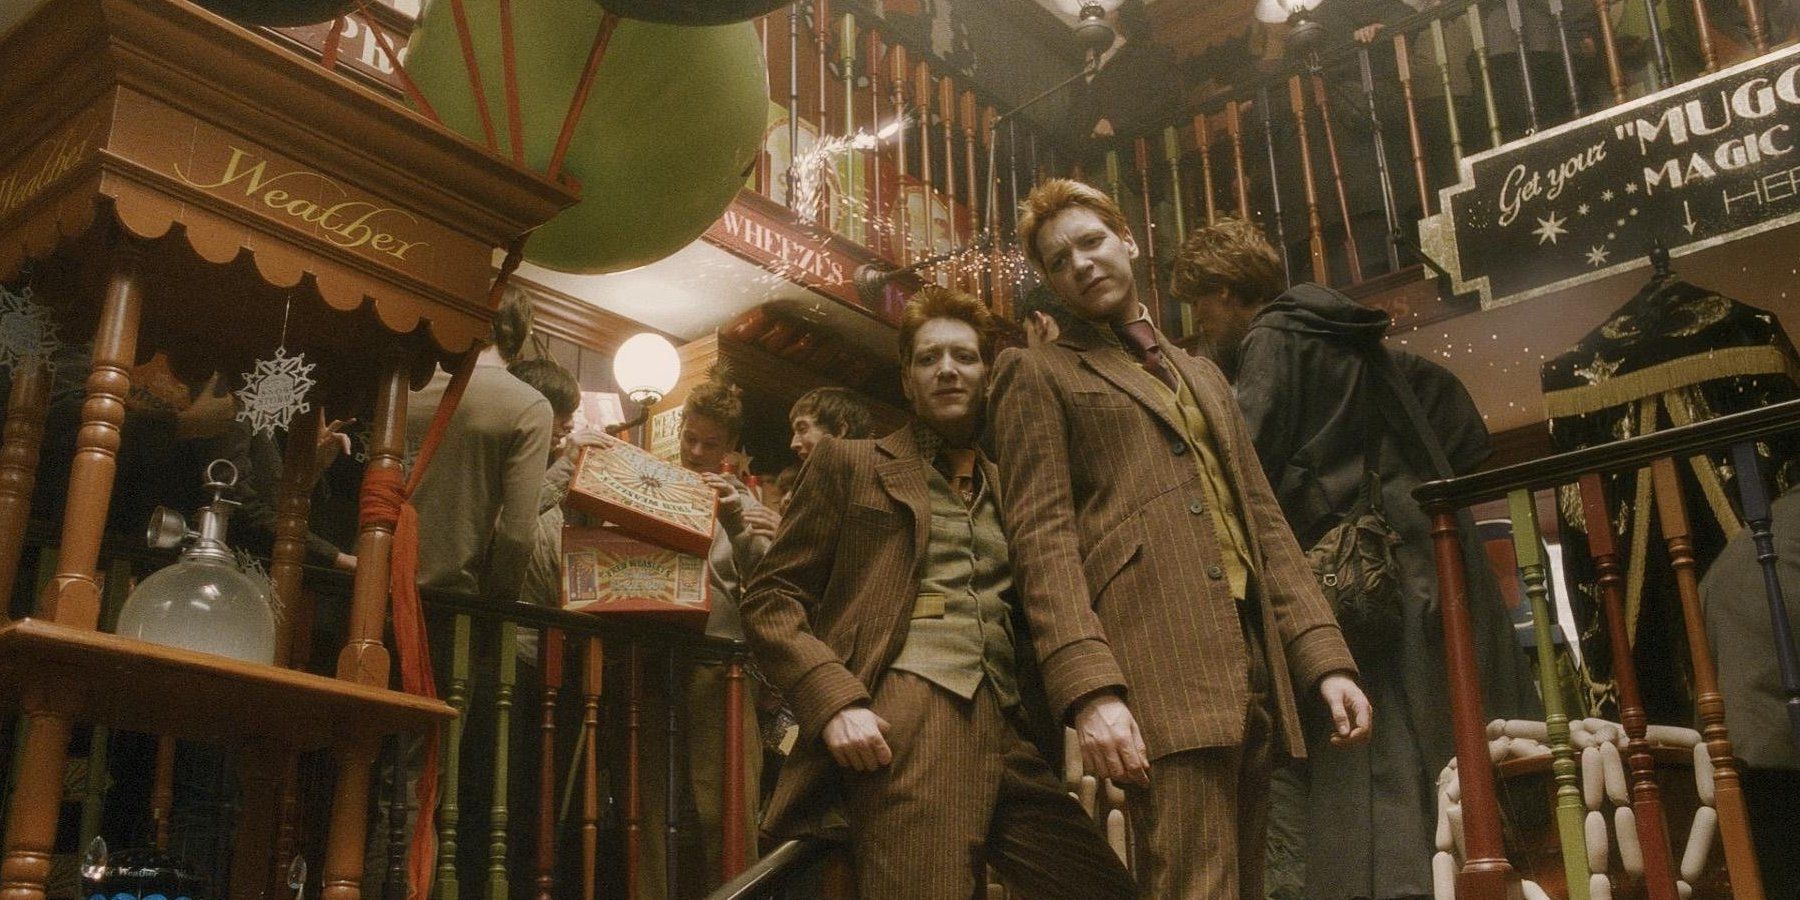 10 Things The Weasley Twins Did After Harry Potter